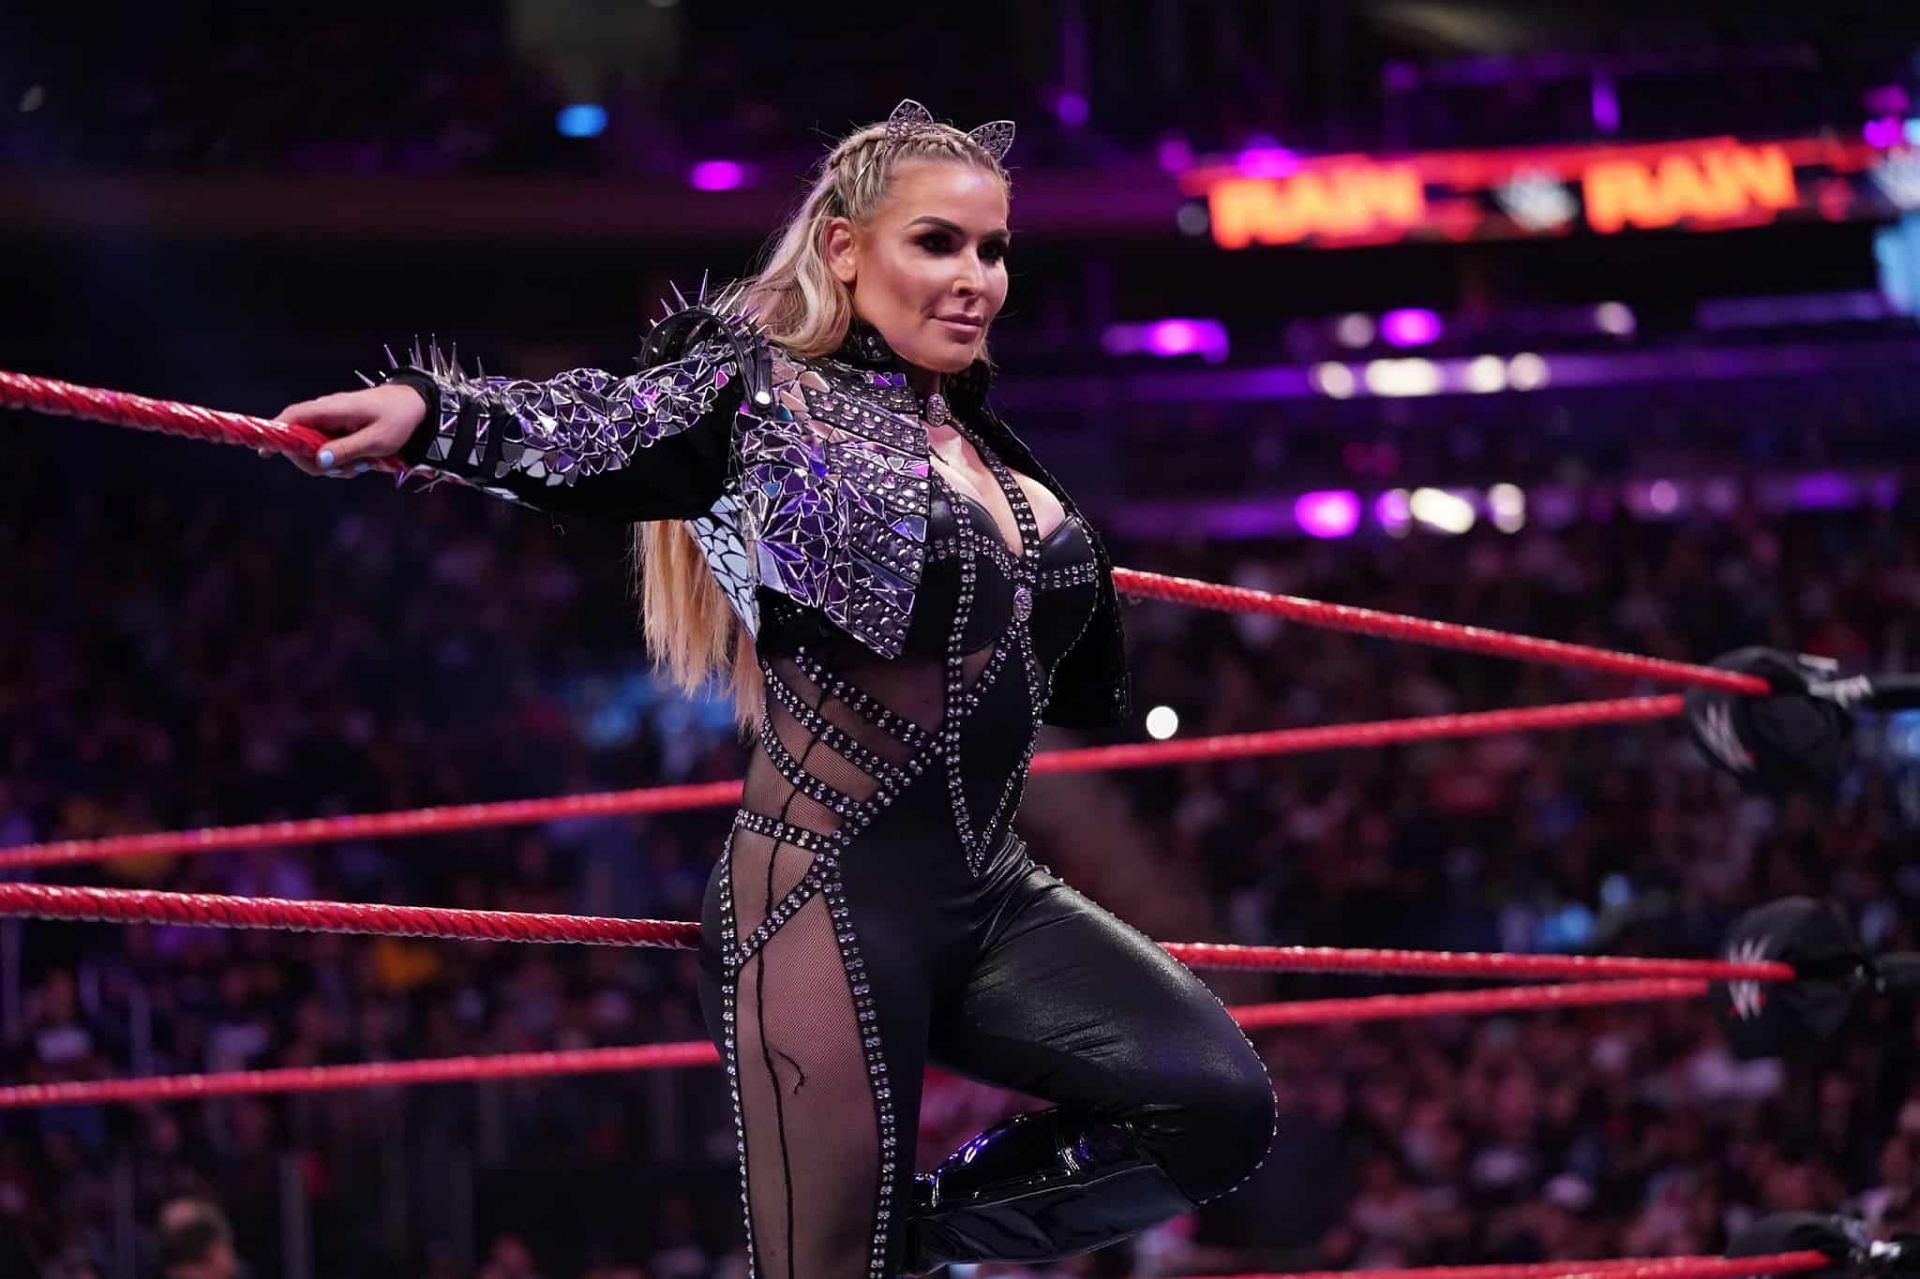 Nattie was eliminated at the Royal Rumble match by Ronda Rousey